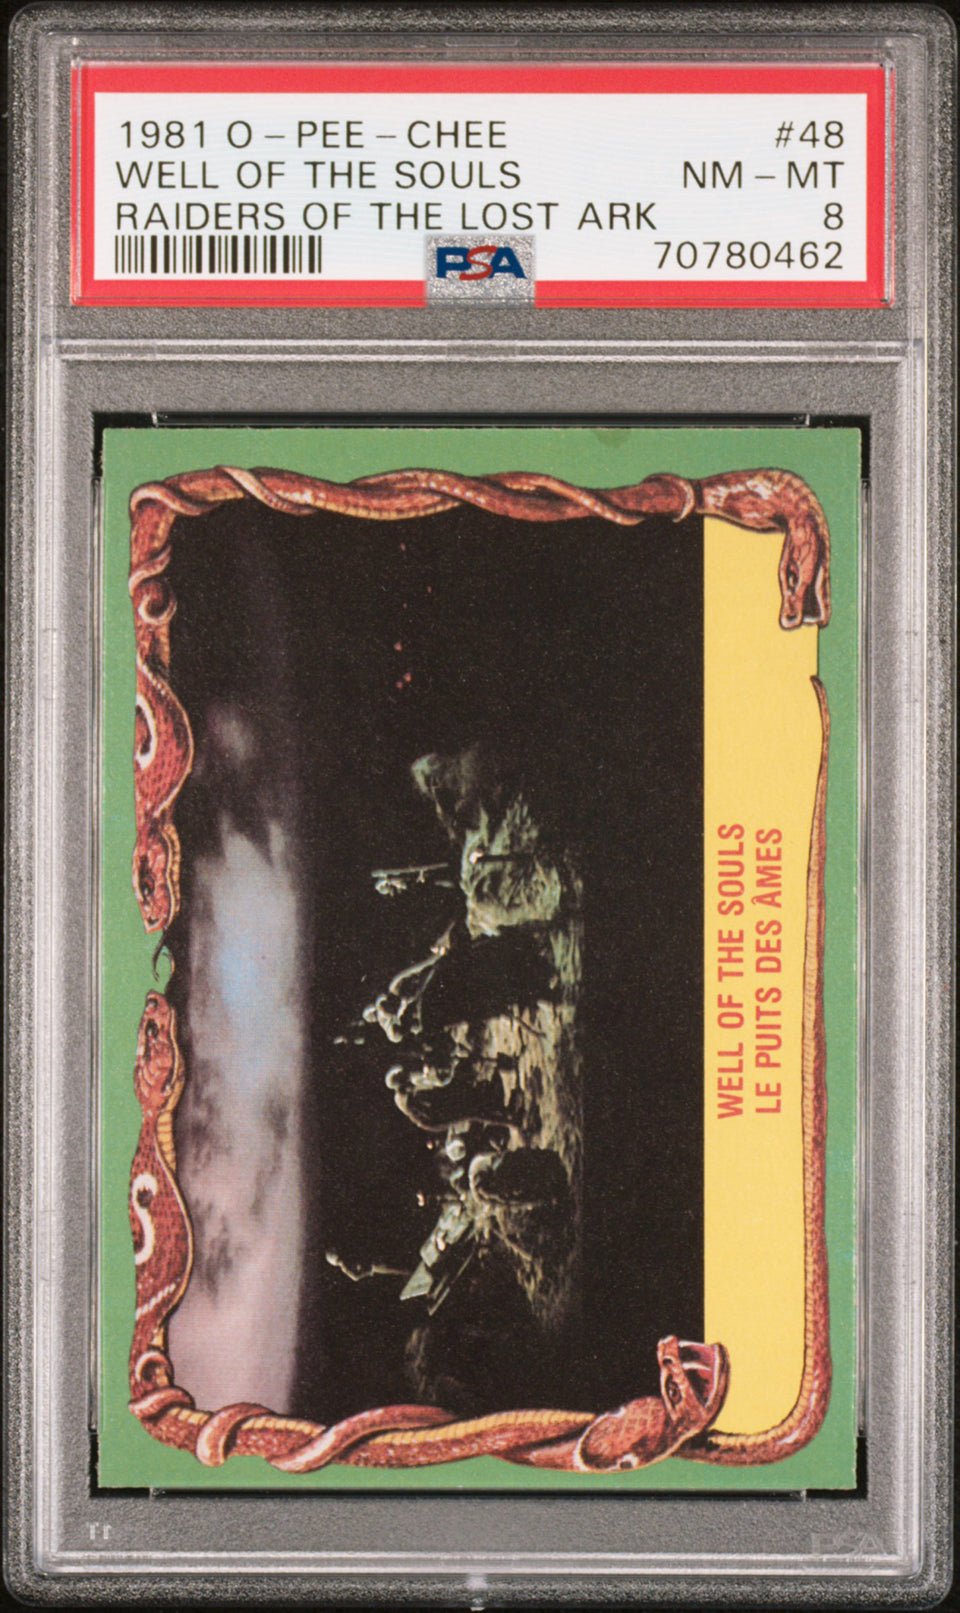 WELLS OF THE SOULS PSA 8 1981 O-Pee-Chee Raiders of the Lost Ark #48 Indiana Jones Base Graded Cards - Hobby Gems